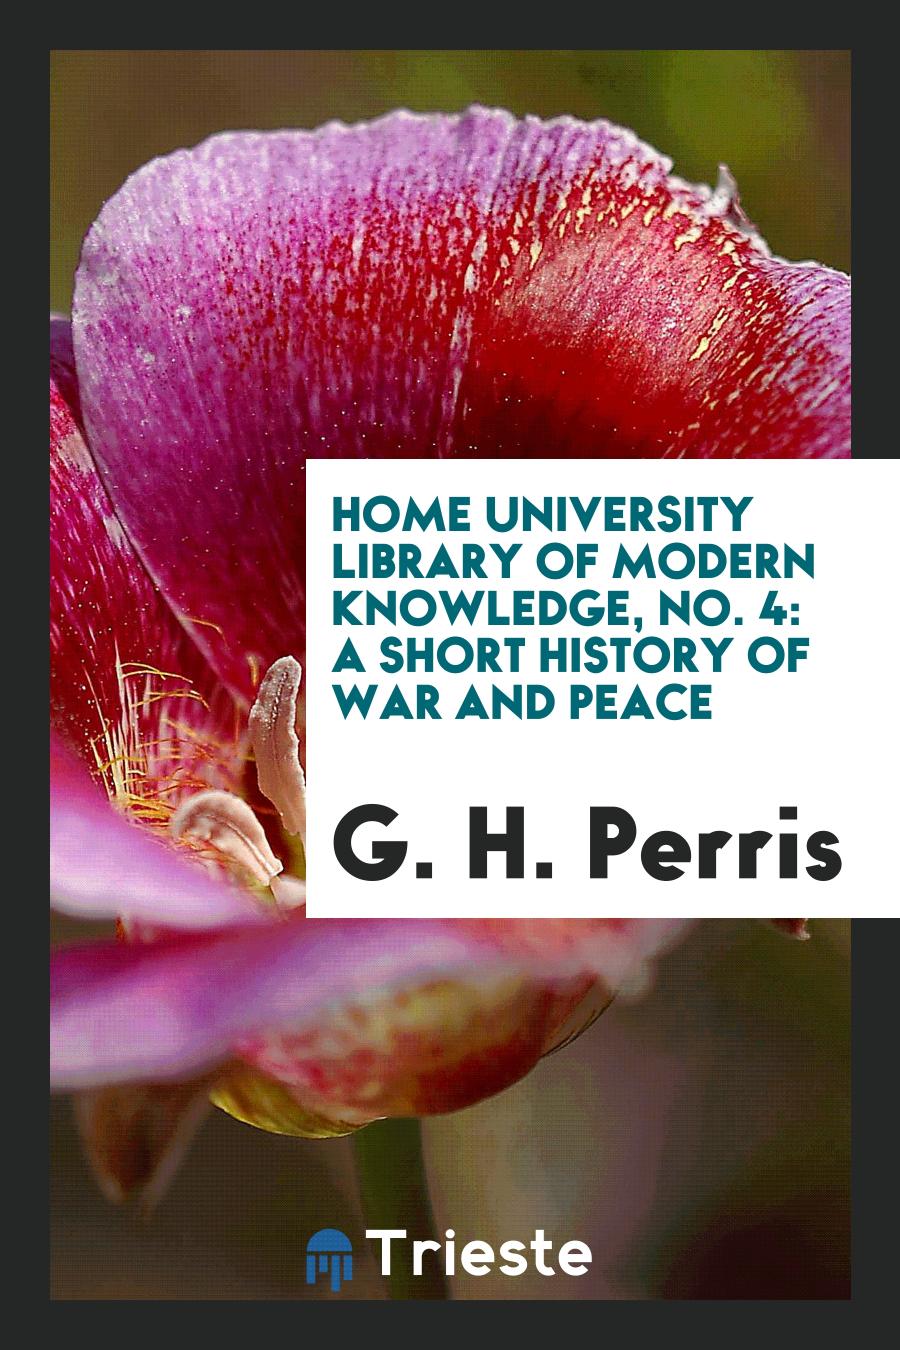 Home University Library of Modern Knowledge, No. 4: A short history of war and peace